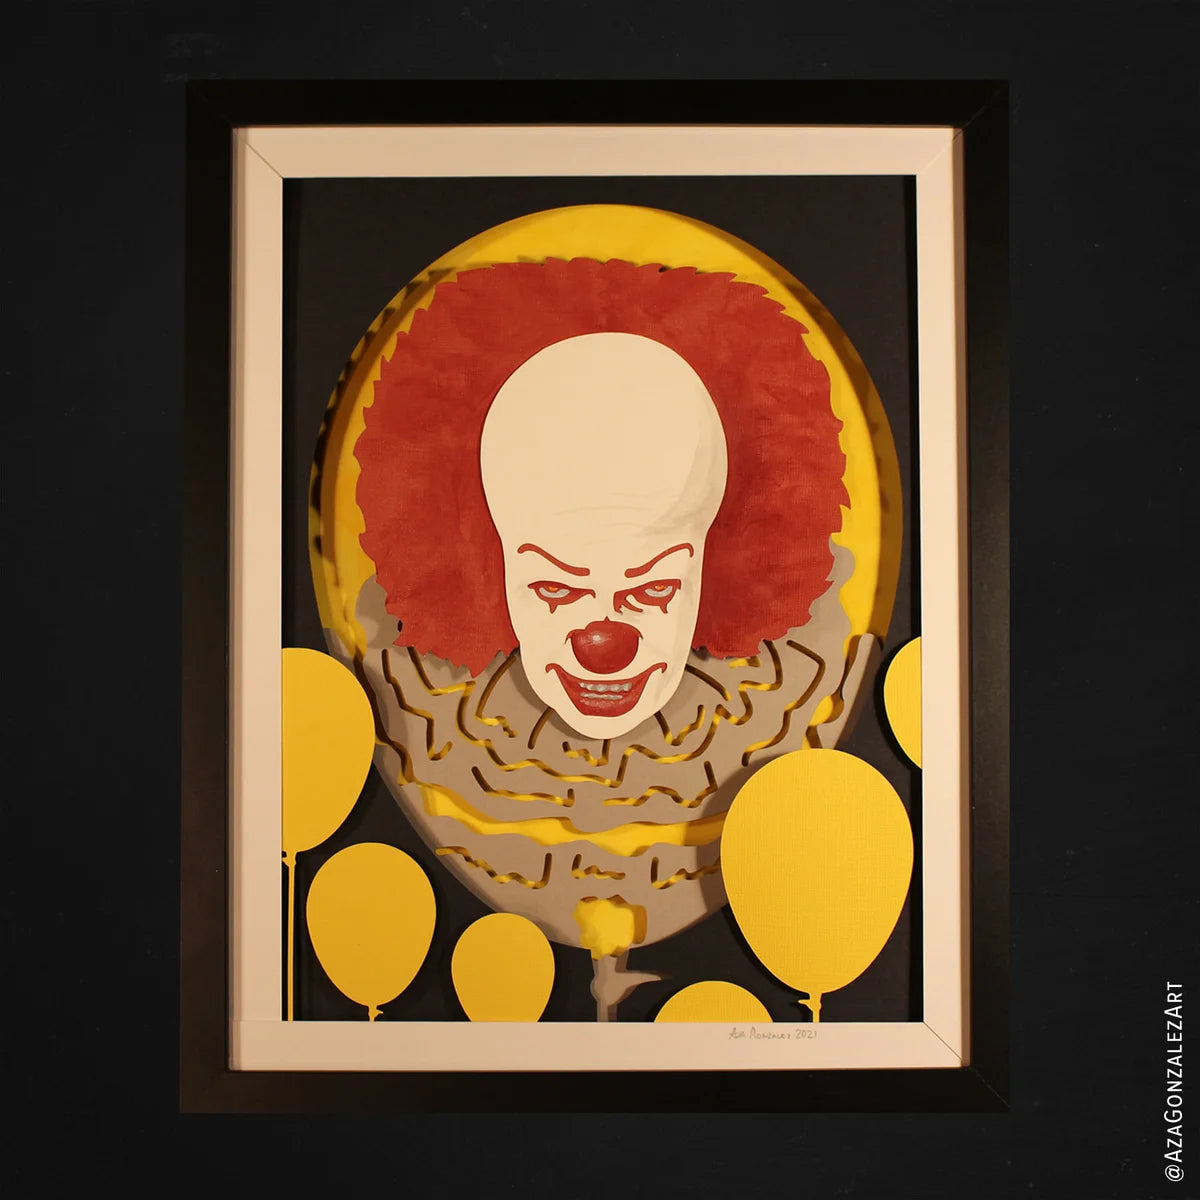 It the Clown Pennywise 80's